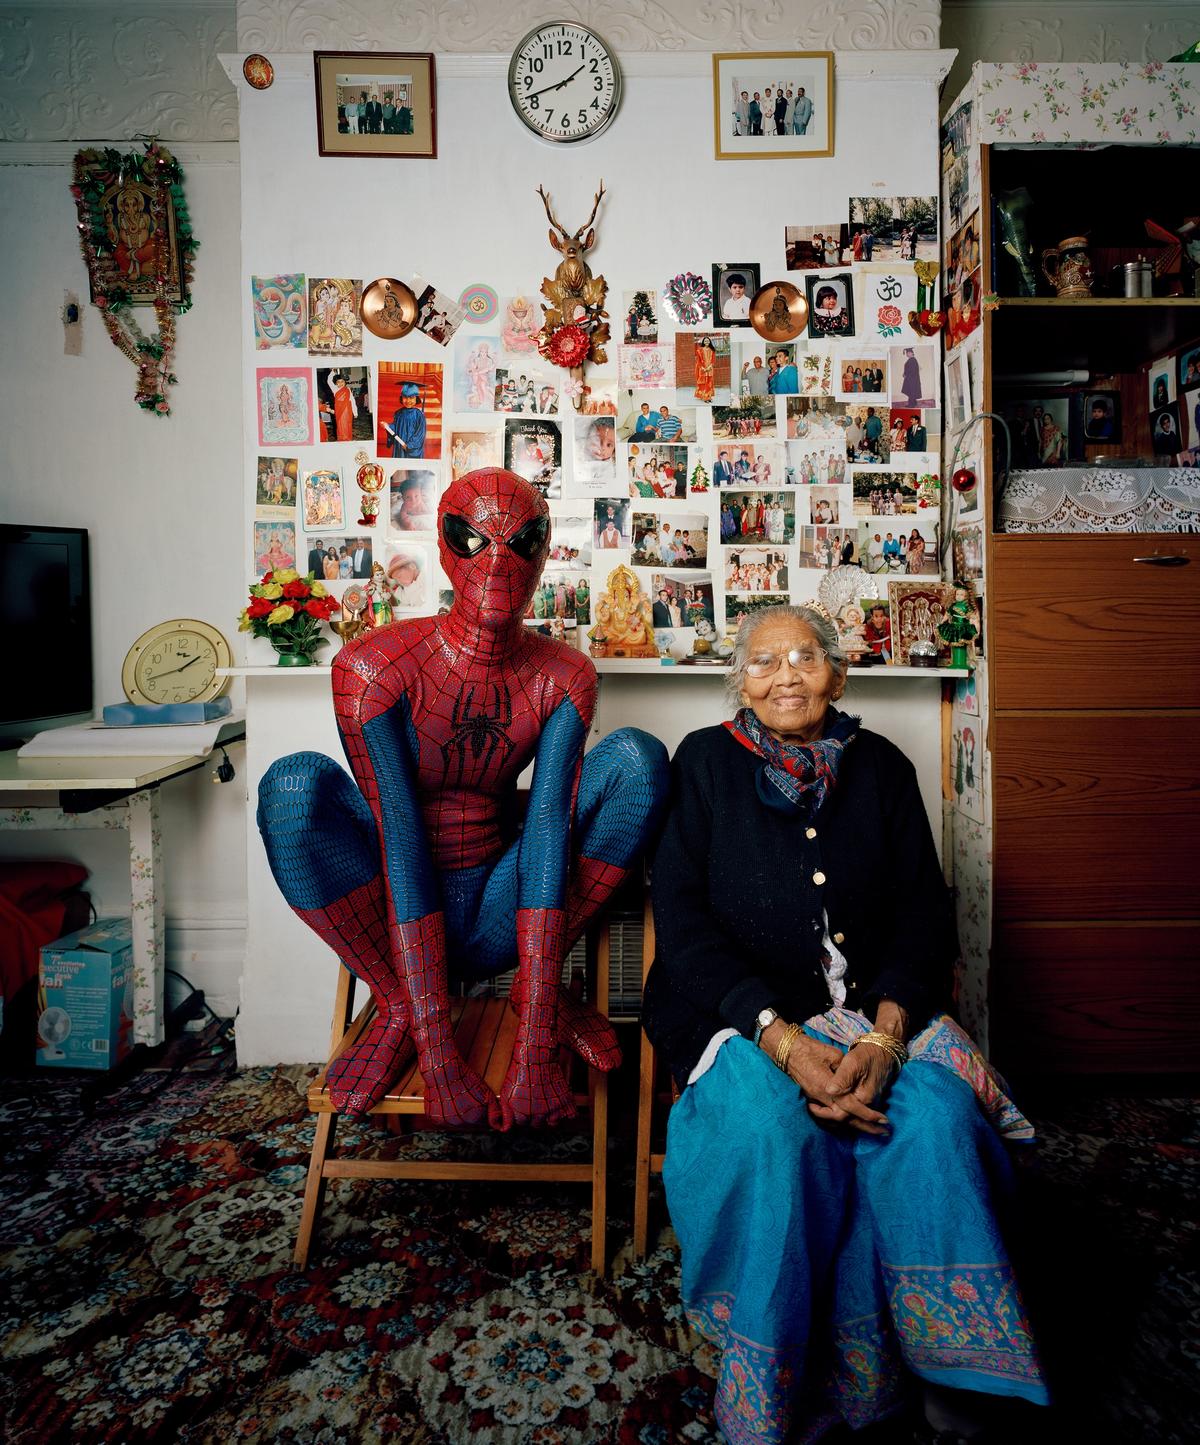 Hetain Patel, dressed in one of his Spider-Man outfits, beside his grandmother Laxmiben, in Baa’s House (2015) © Hetain Patel